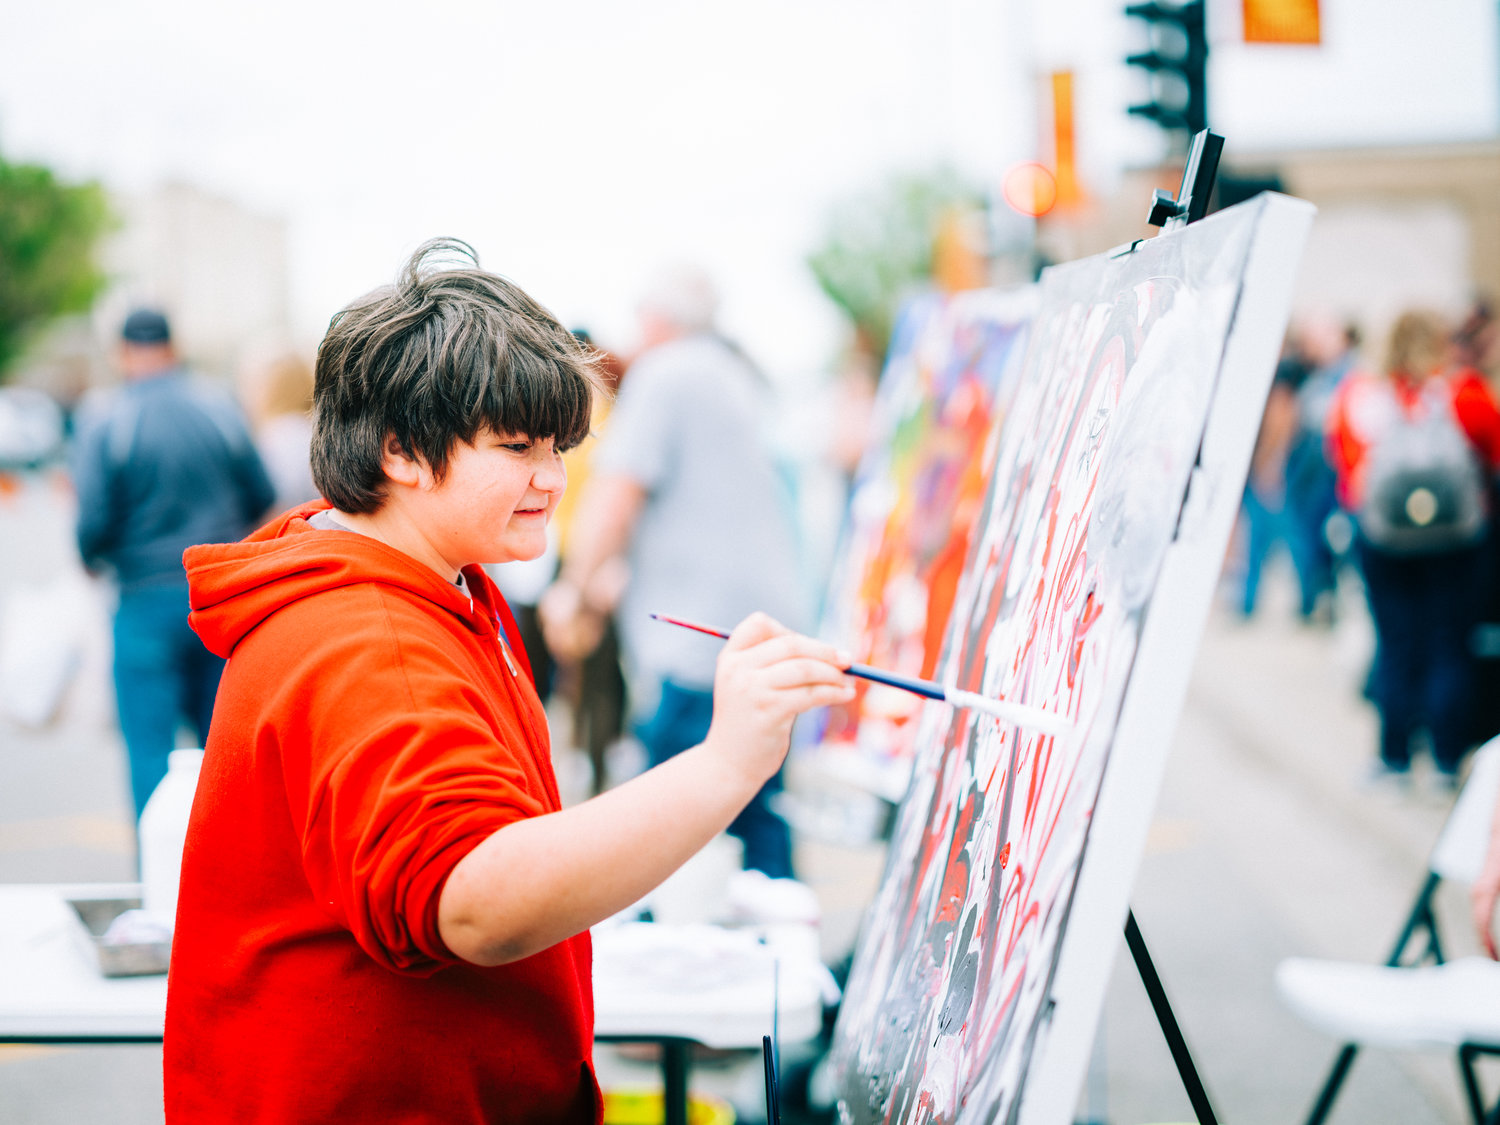 The Pittsburg ArtWalk on Friday included not only art for sale, but various kinds of live art demonstrations.